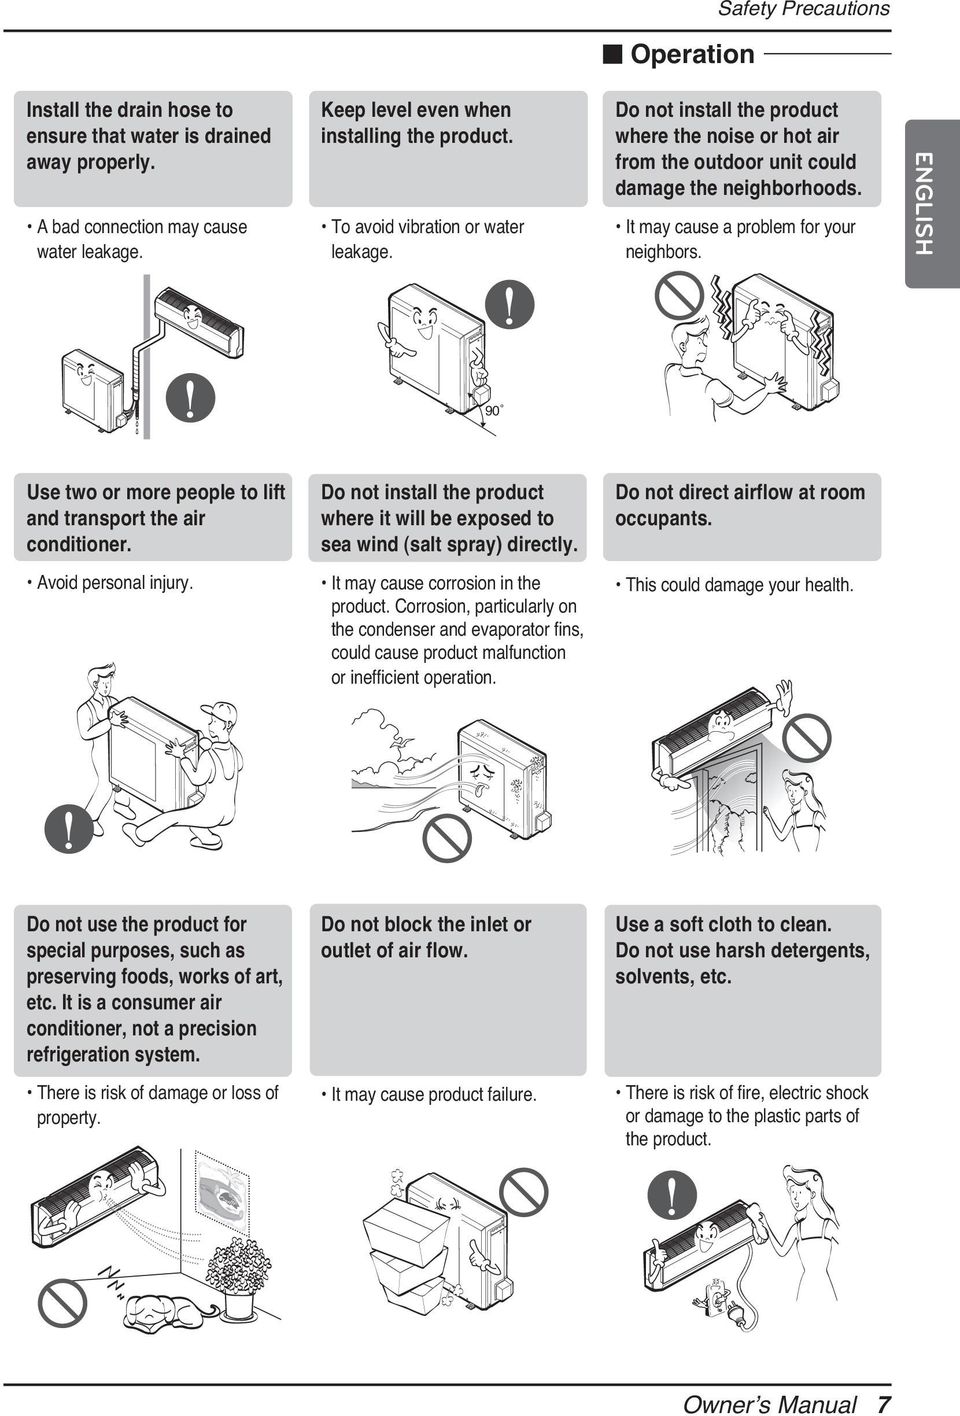 ENGLISH 90 Use two or more people to lift and transport the air conditioner. Do not install the product where it will be exposed to sea wind (salt spray) directly.